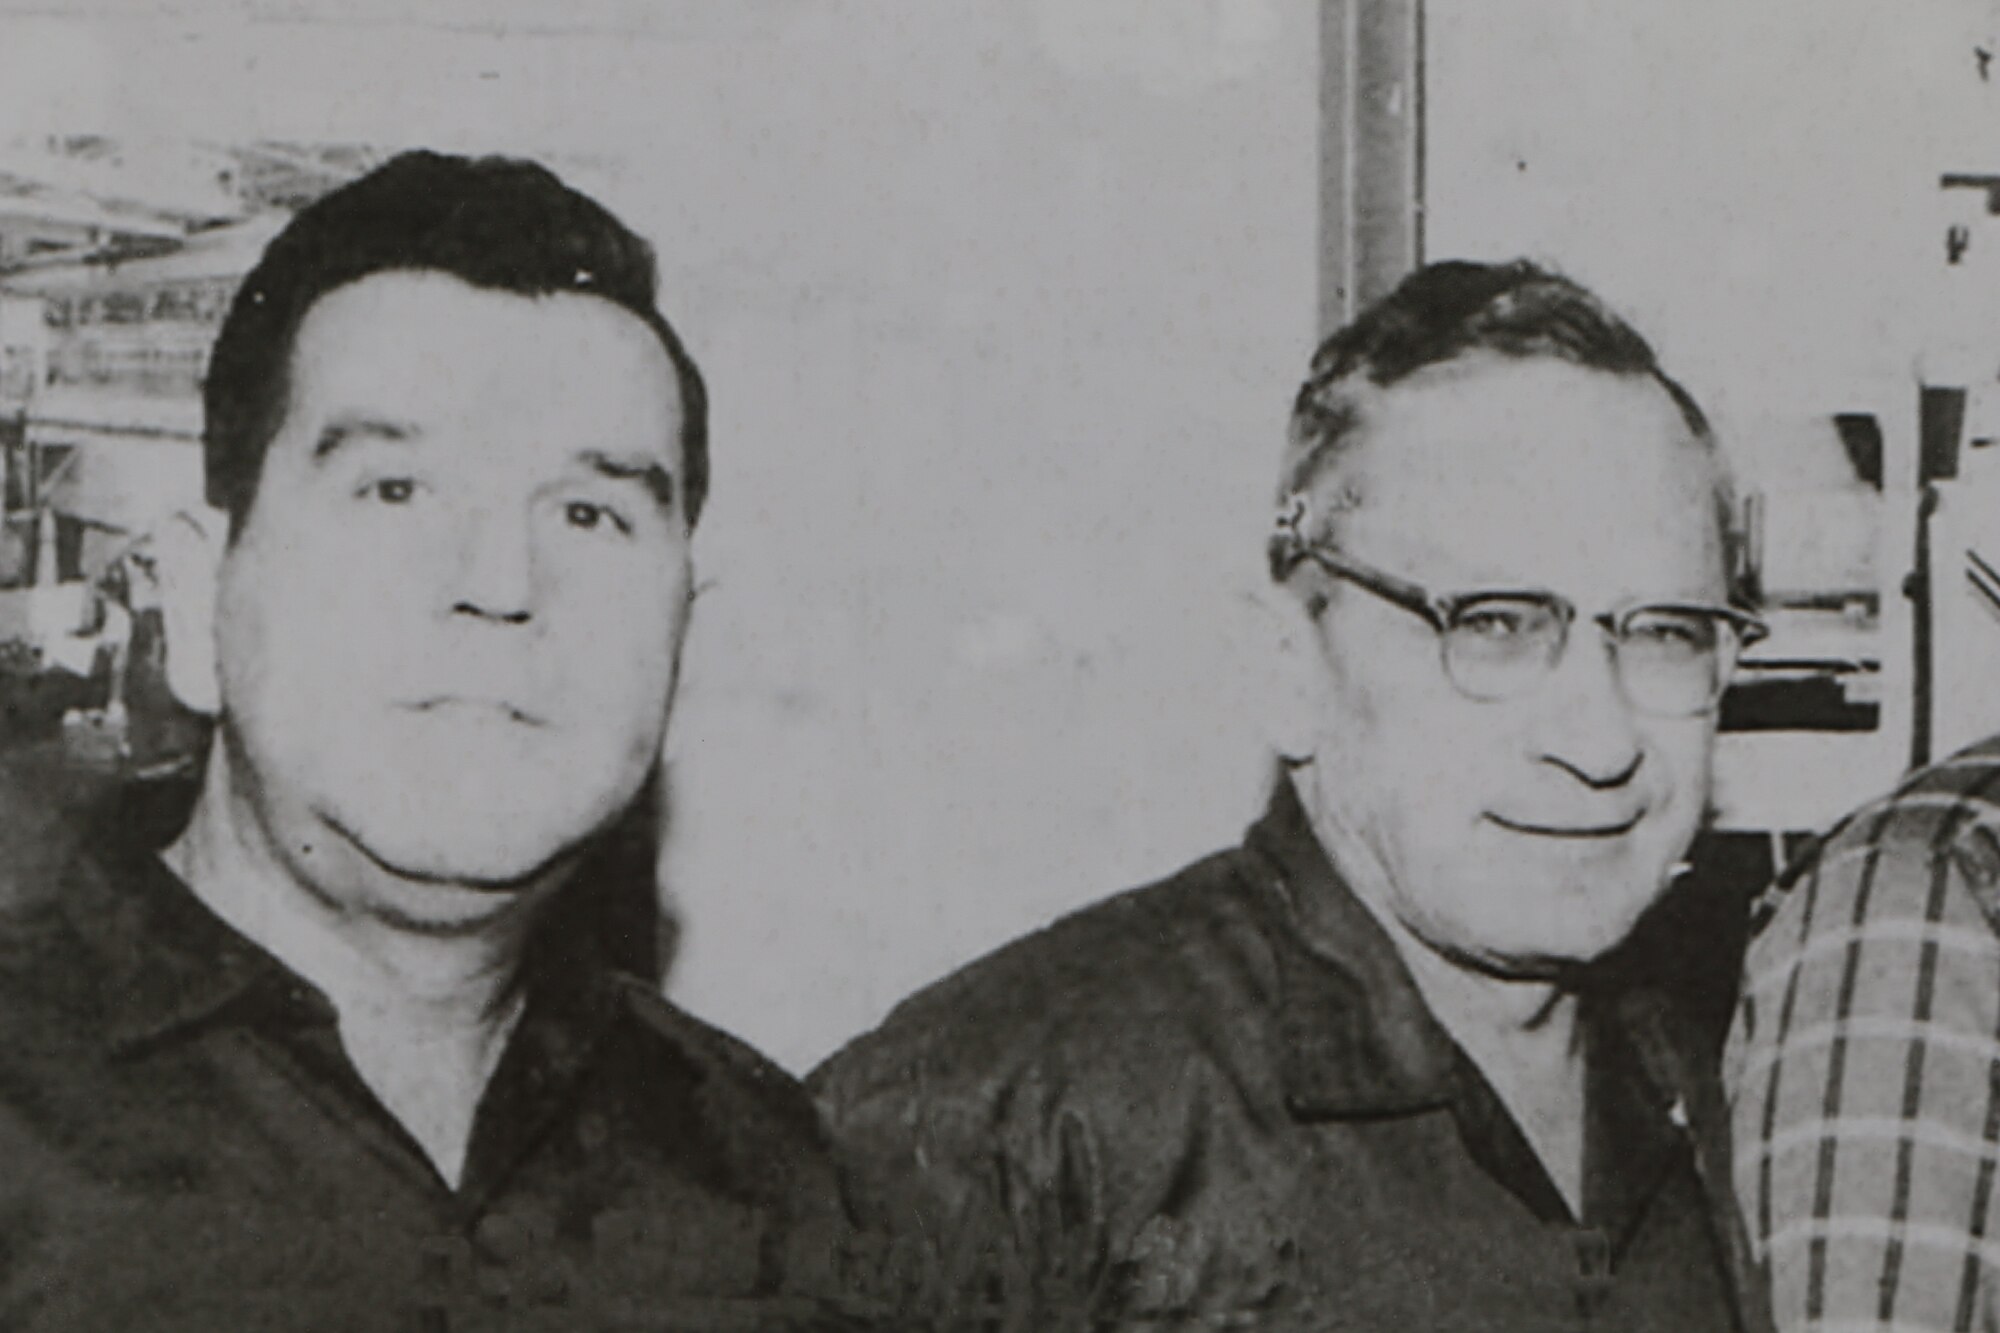 John Hill, left, and Alvin Overman. (U.S. Air Force Photo)